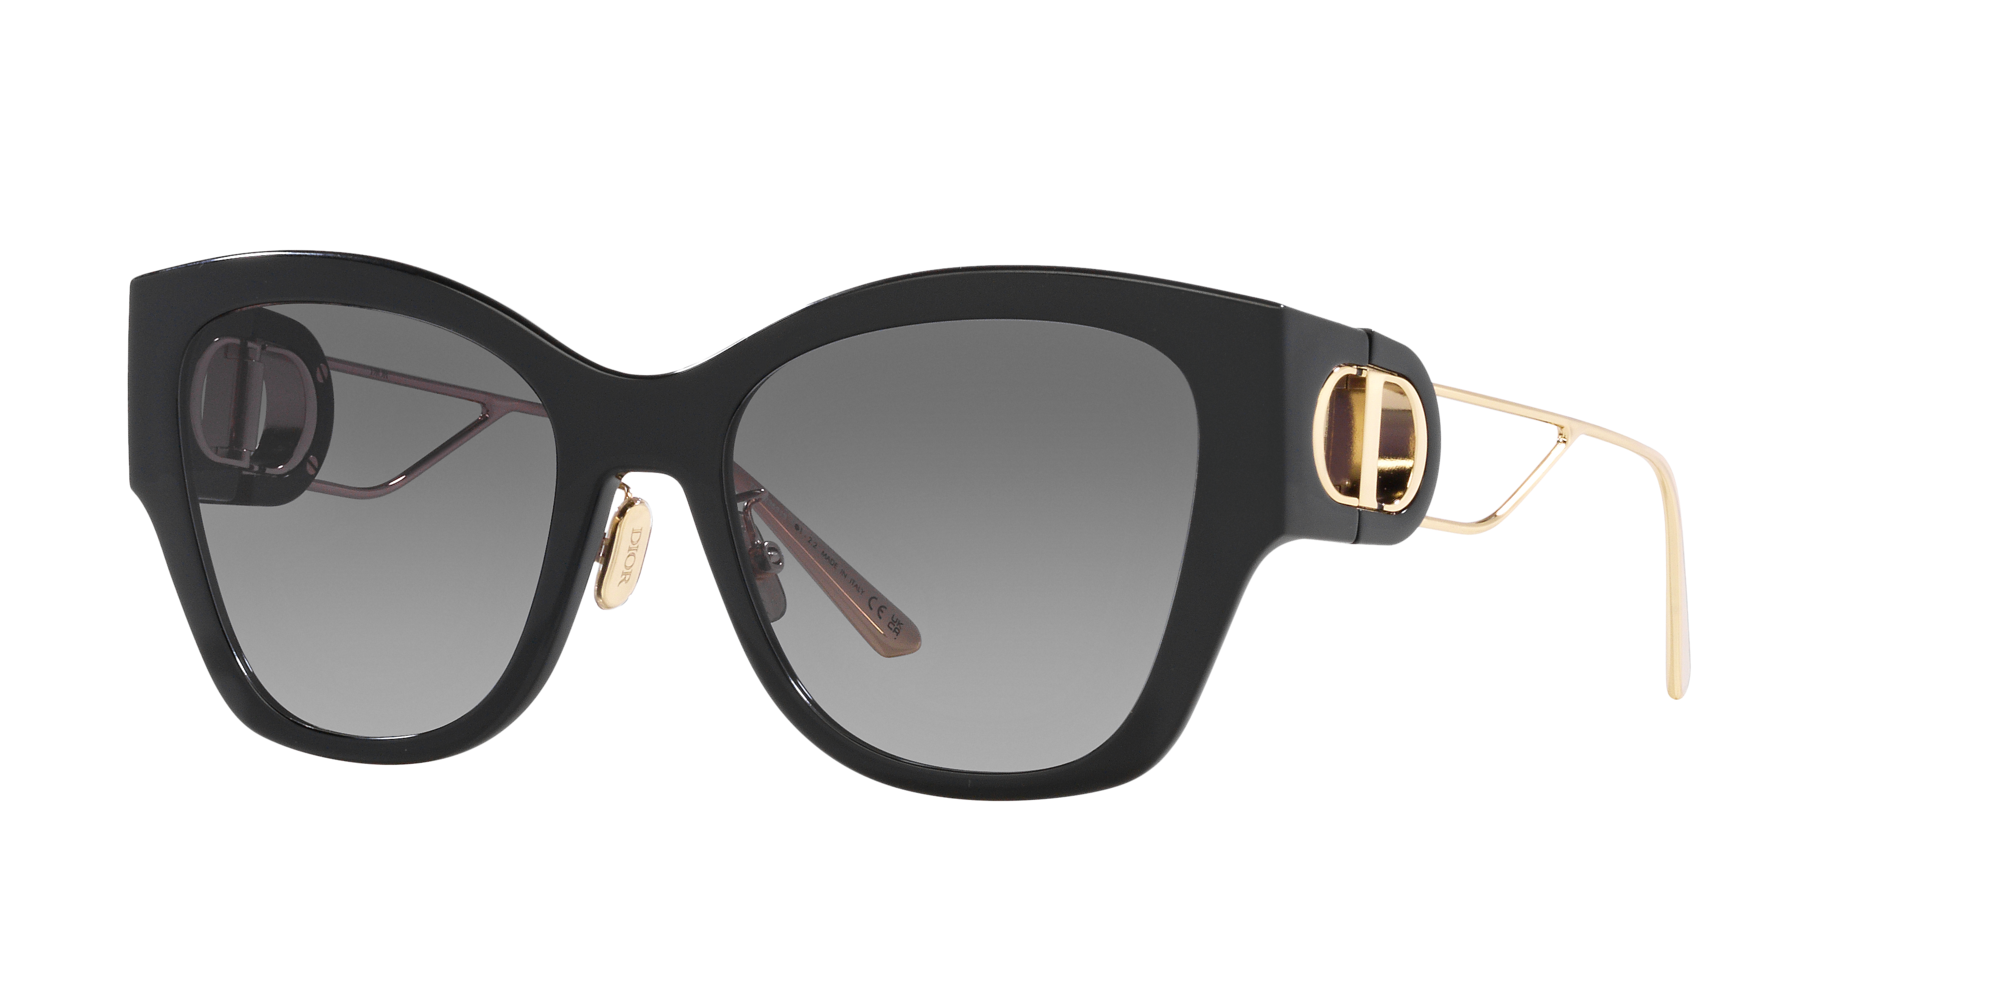 Christian Dior 30Montaigne 2 Sunglasses  FREE Shipping  SOLD OUT